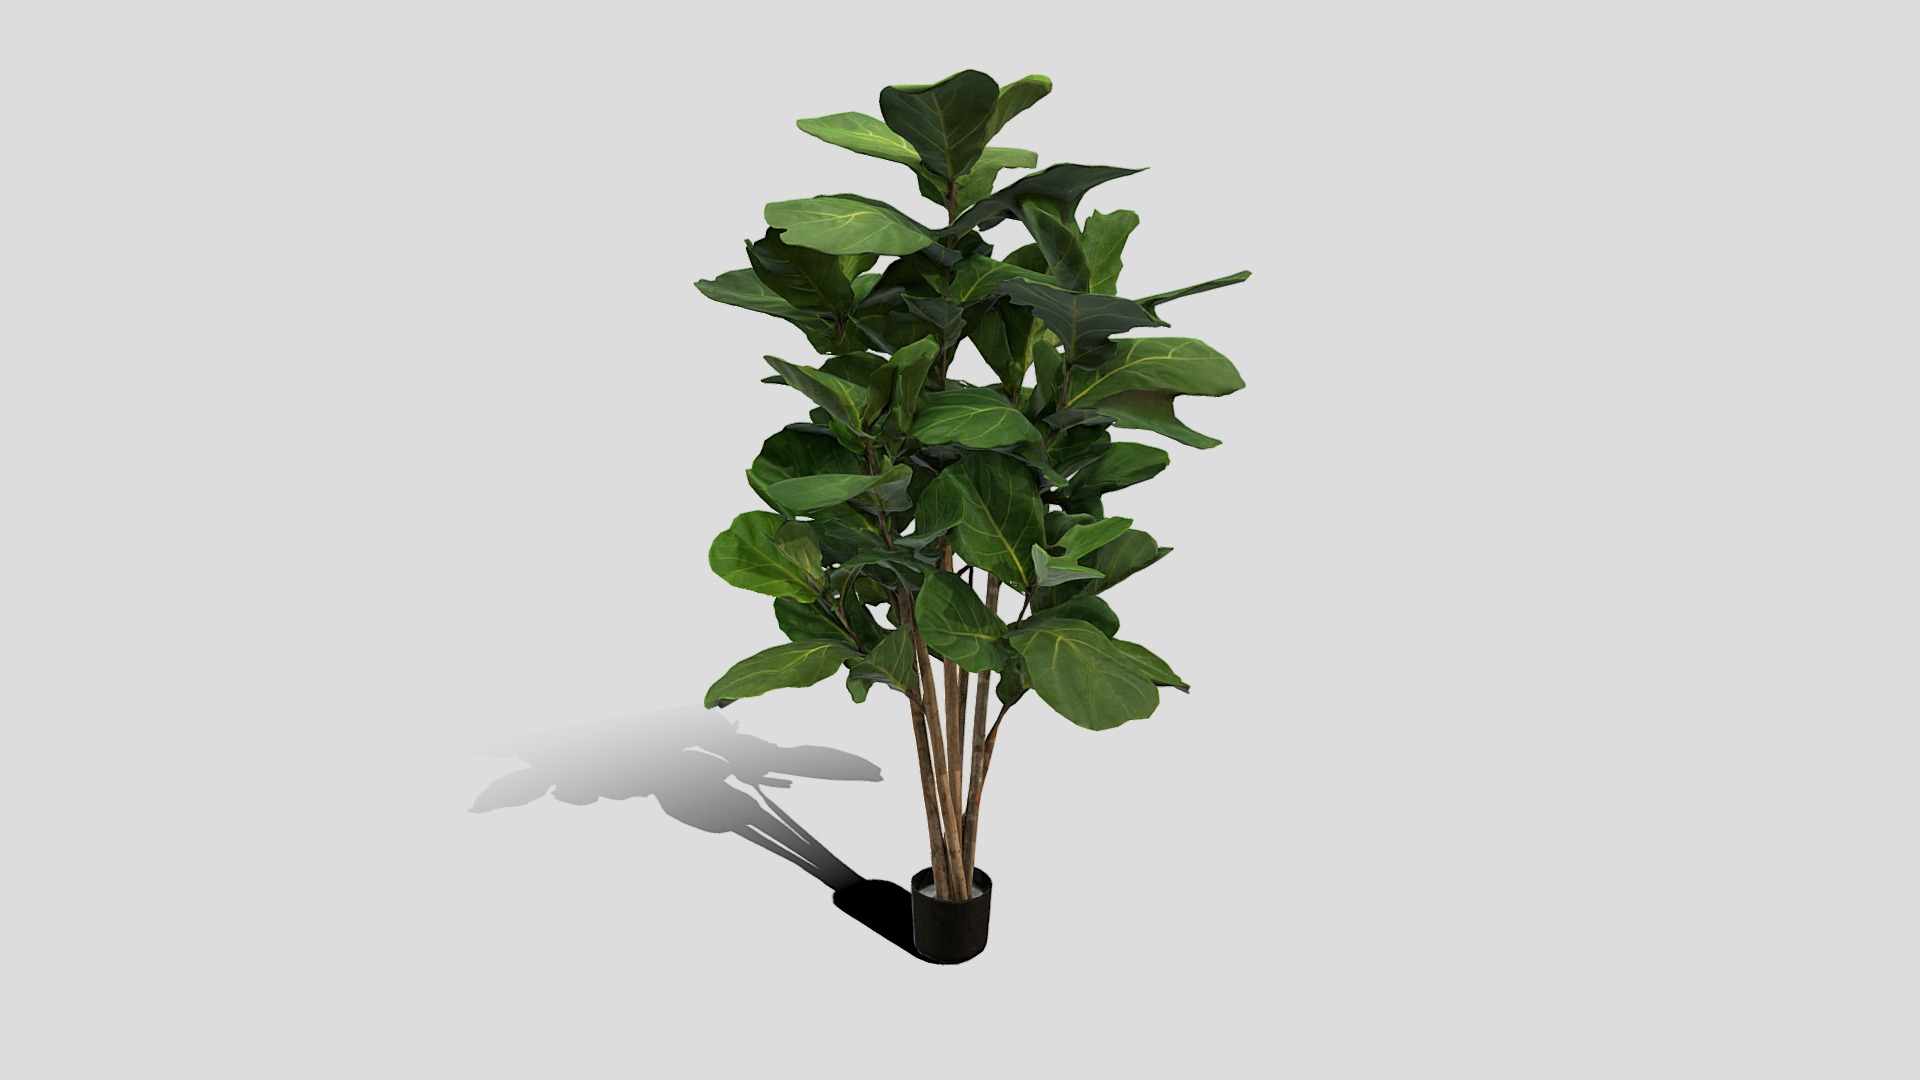 3D model 000004_102417 - This is a 3D model of the 000004_102417. The 3D model is about a plant in a pot.